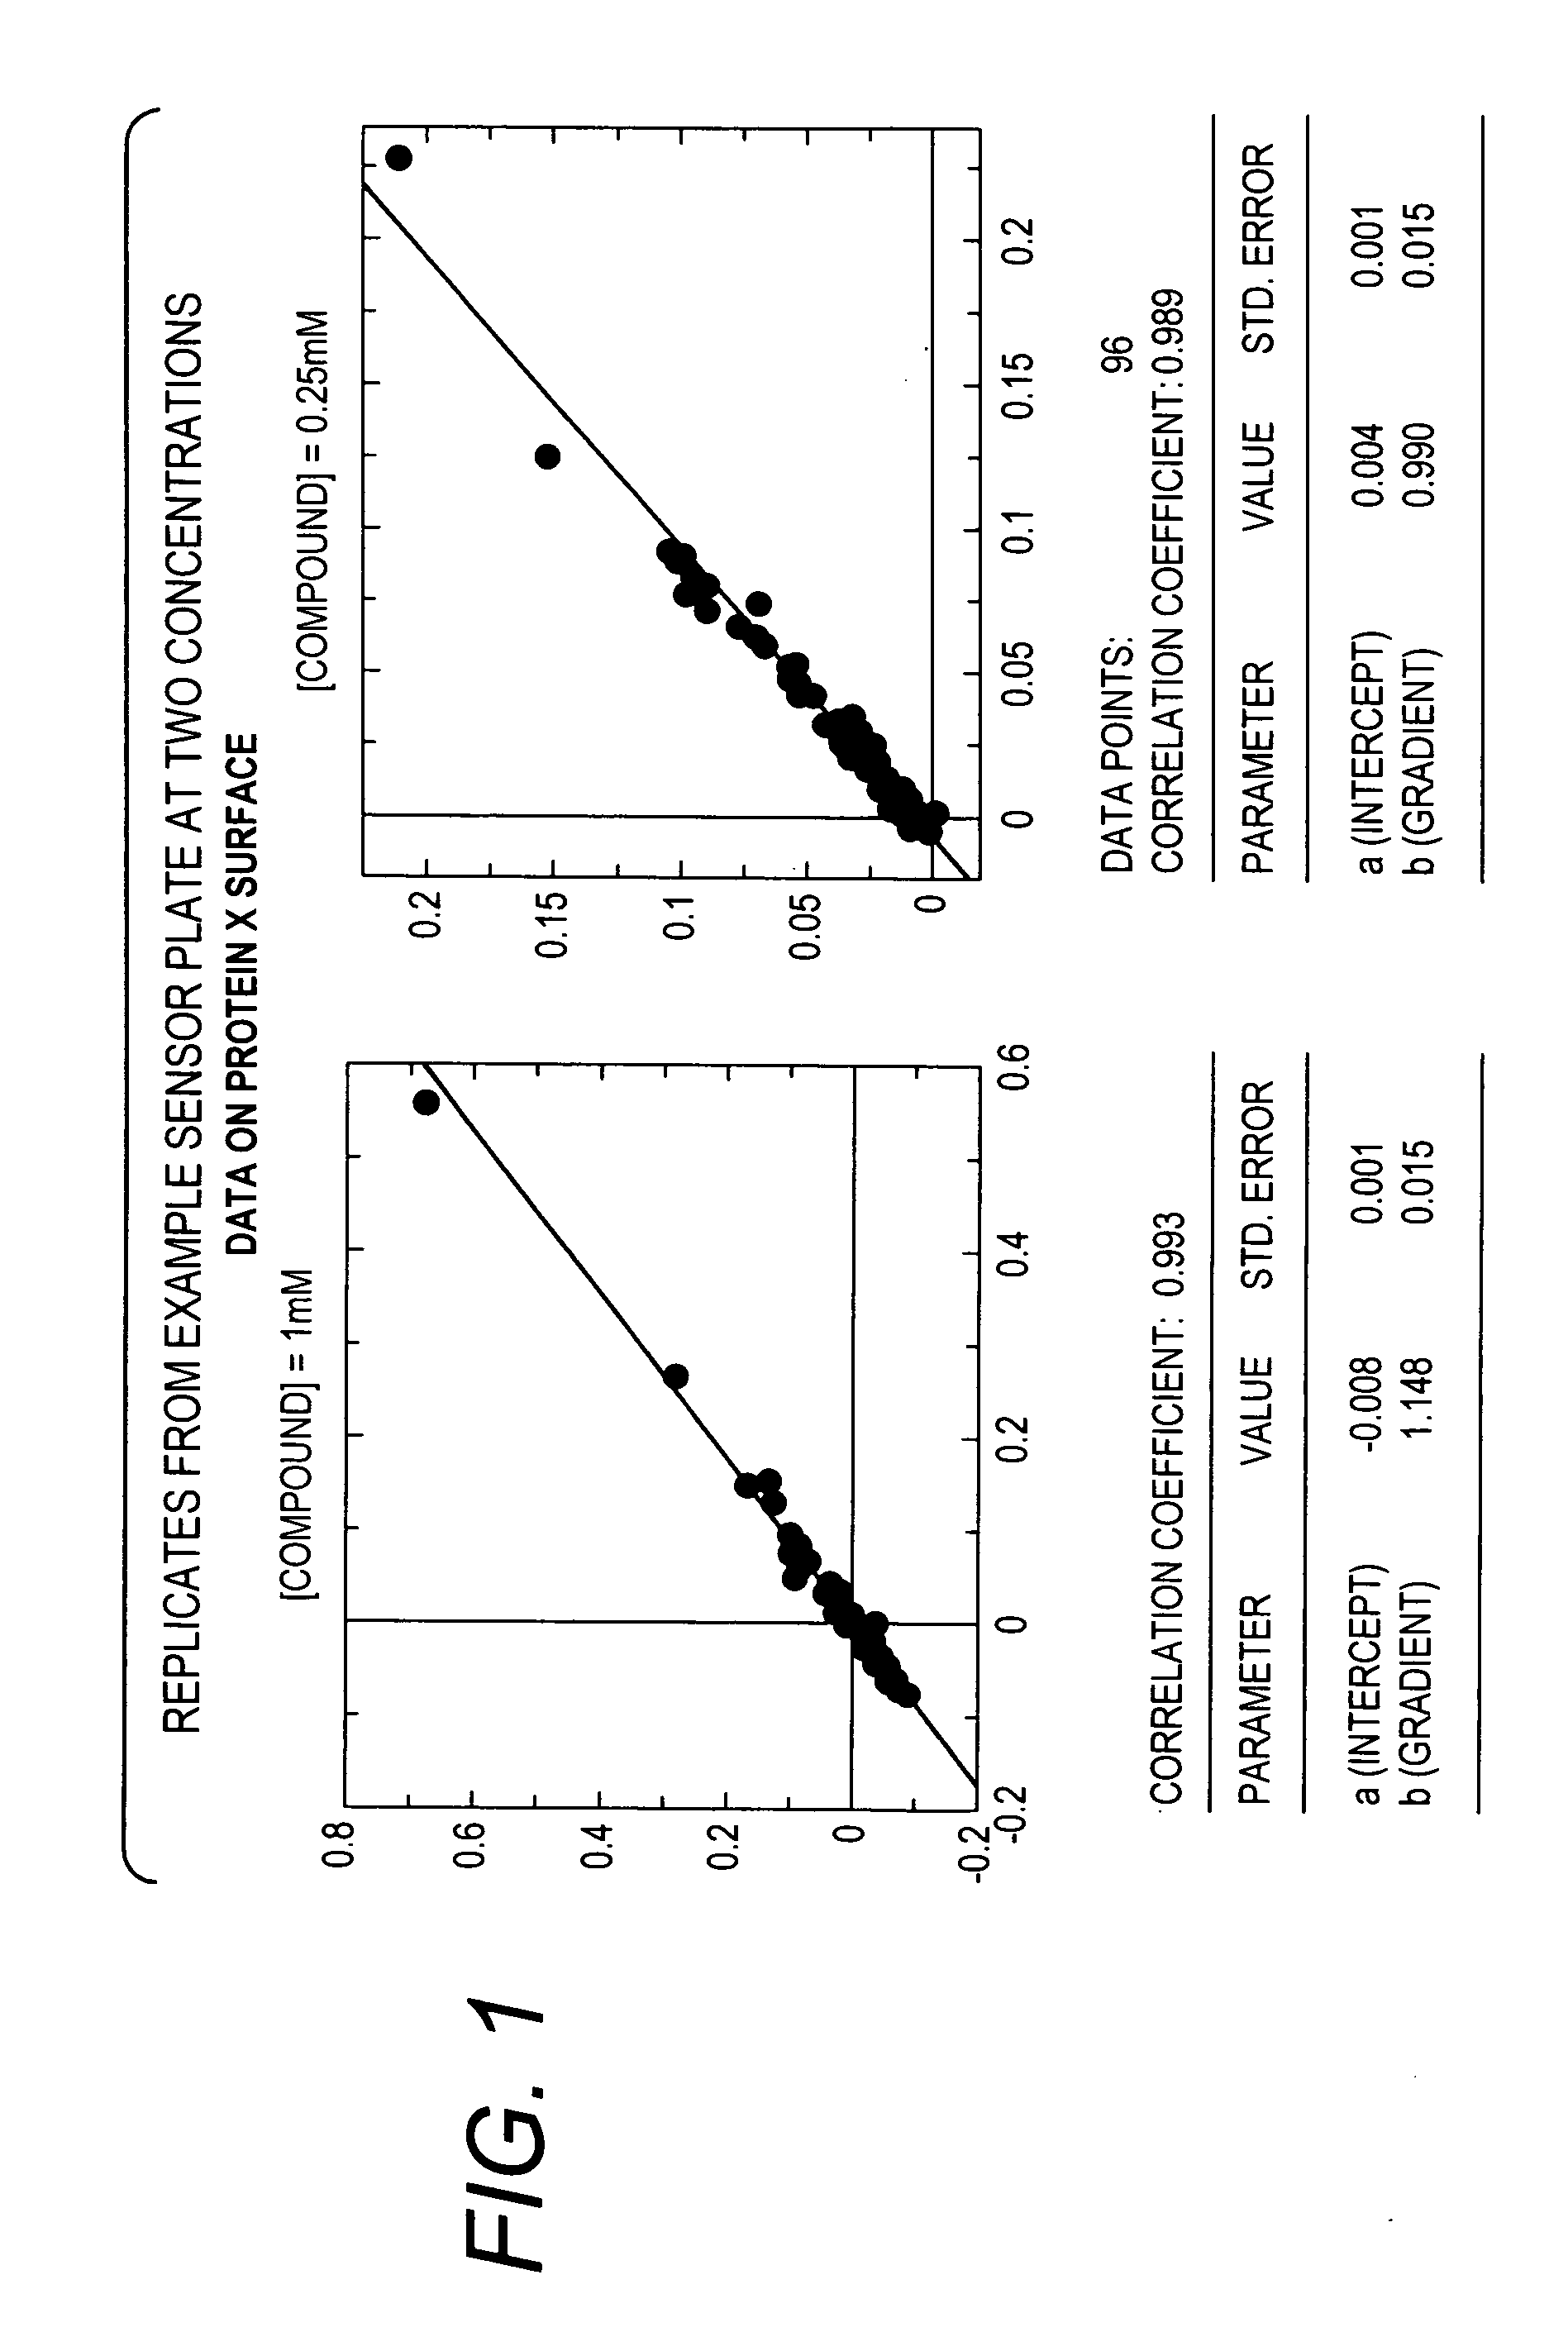 Method for Employing a Biosensor to Detect Small Molecules ("Fragments") that Bind Directly to Immobilized Protein Targets